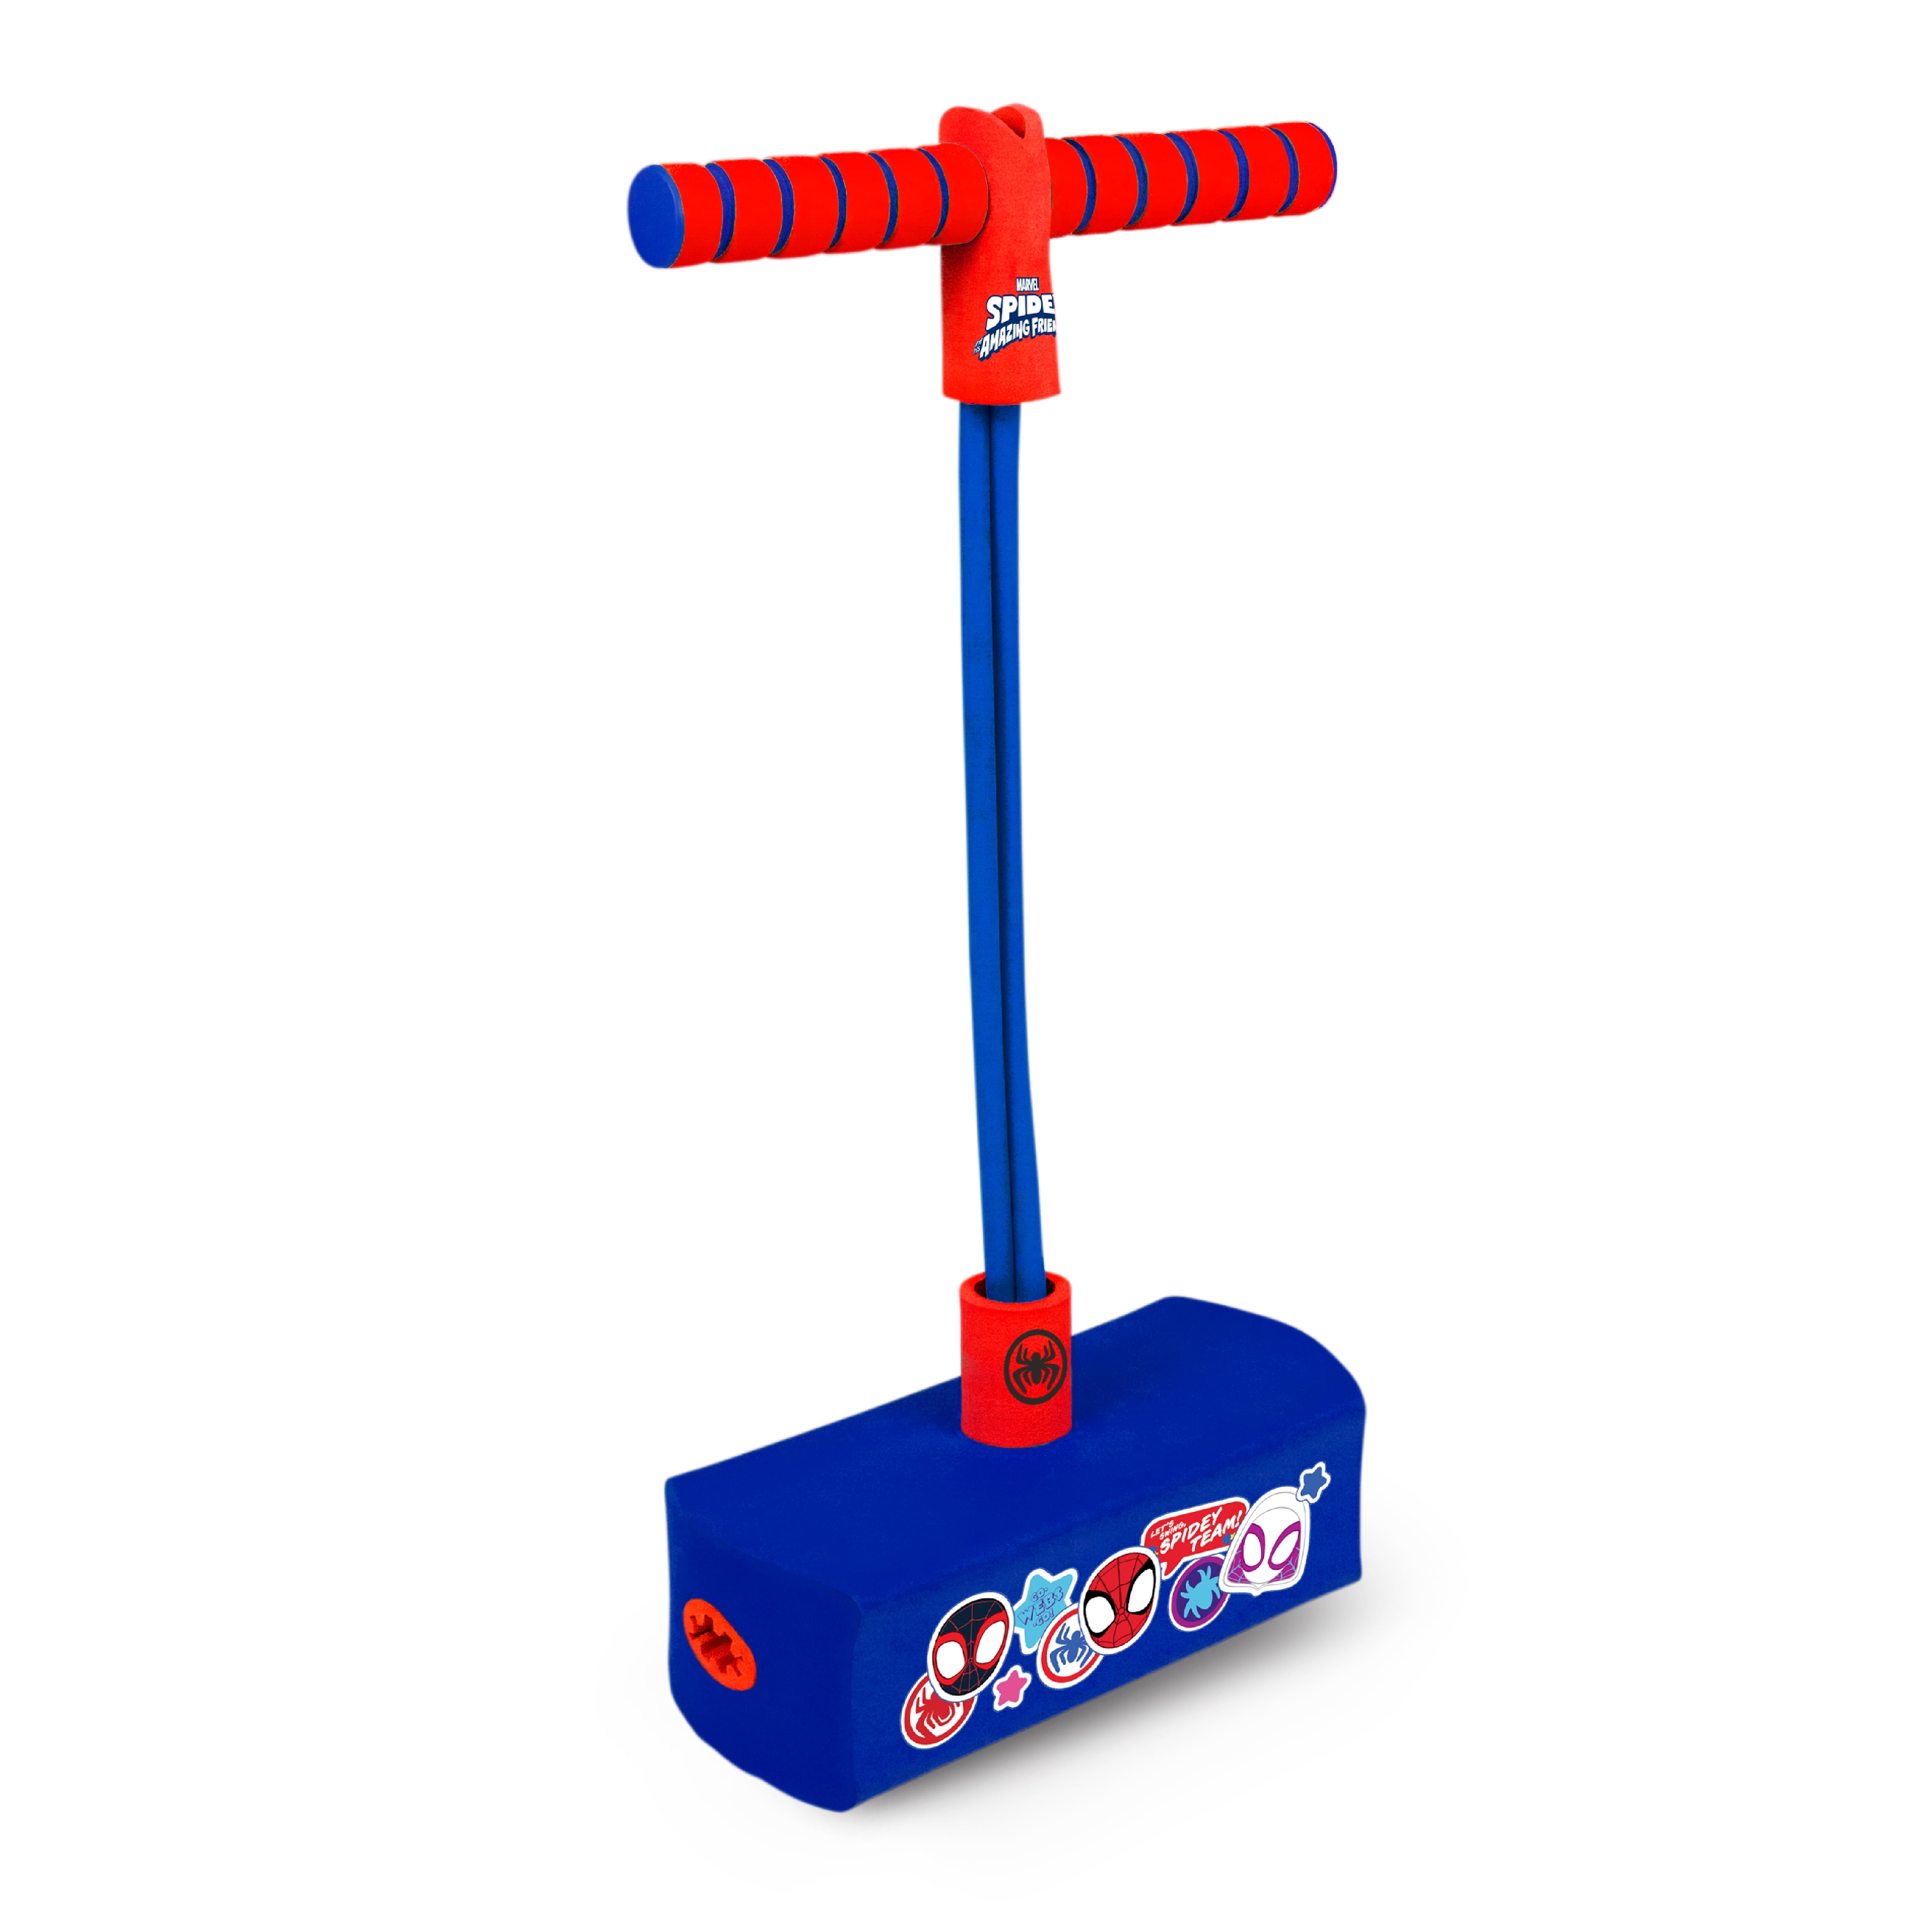 Foam Pogo Stick Jumper for Kids Foam and Bungee Jumper for Ages 3 and up Fun and Safe Pogo Stick for Toddlers Supports up to 250lbs 